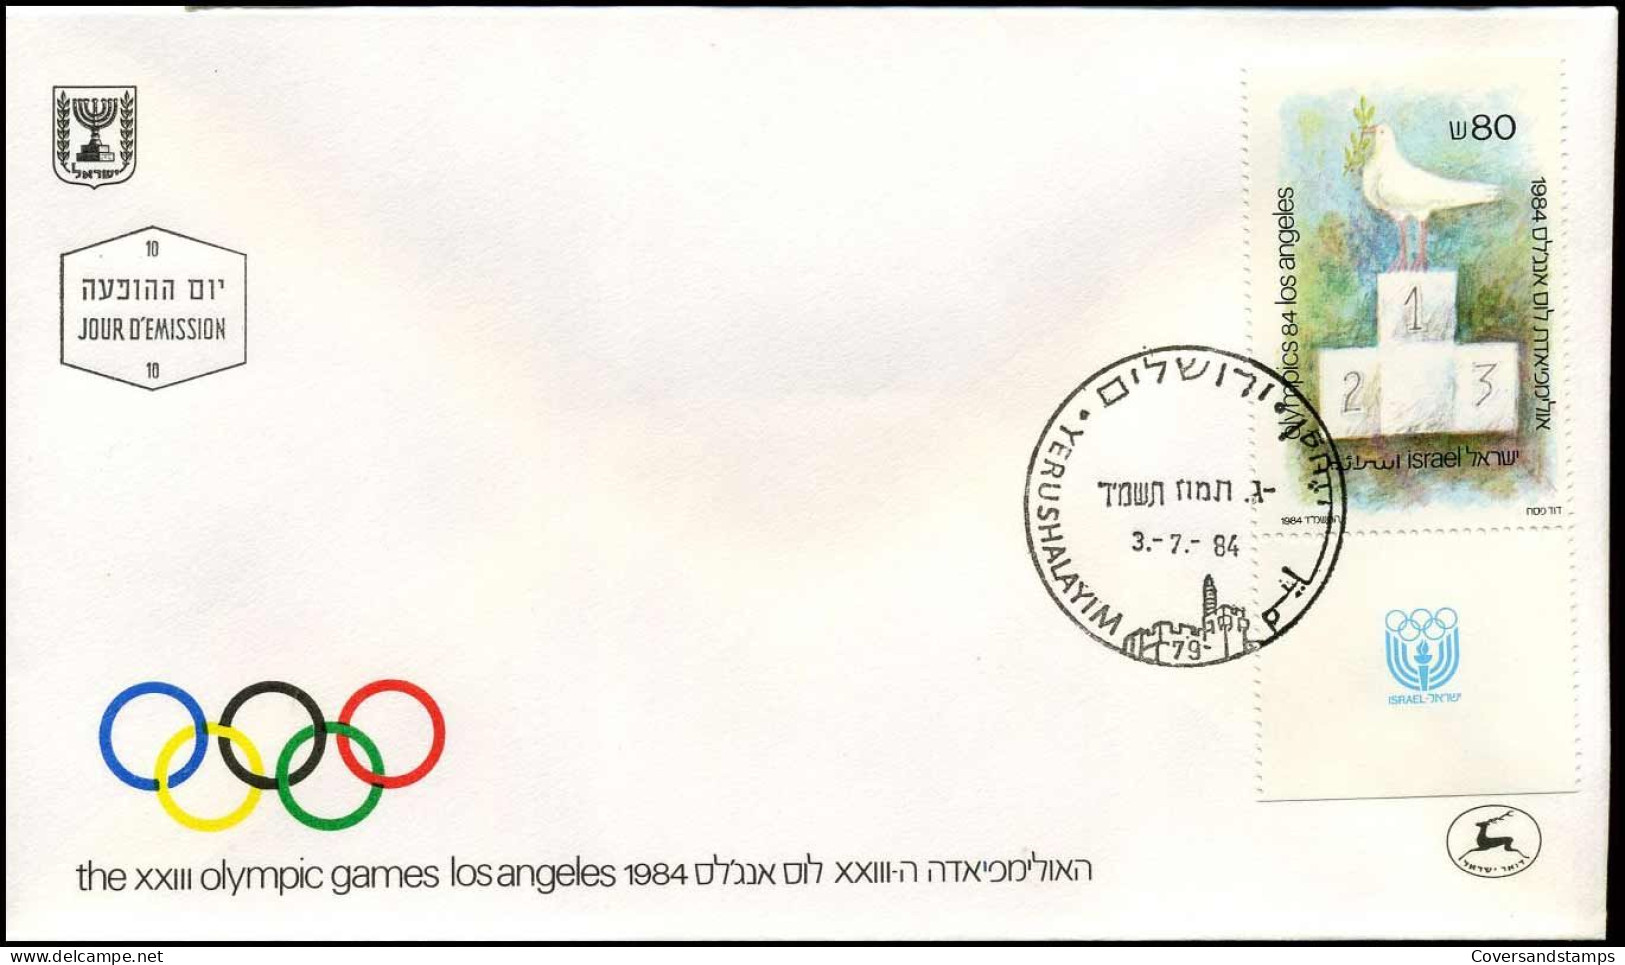 FDC - The XXIII Olympic Games Los Angeles 1984 - FDC